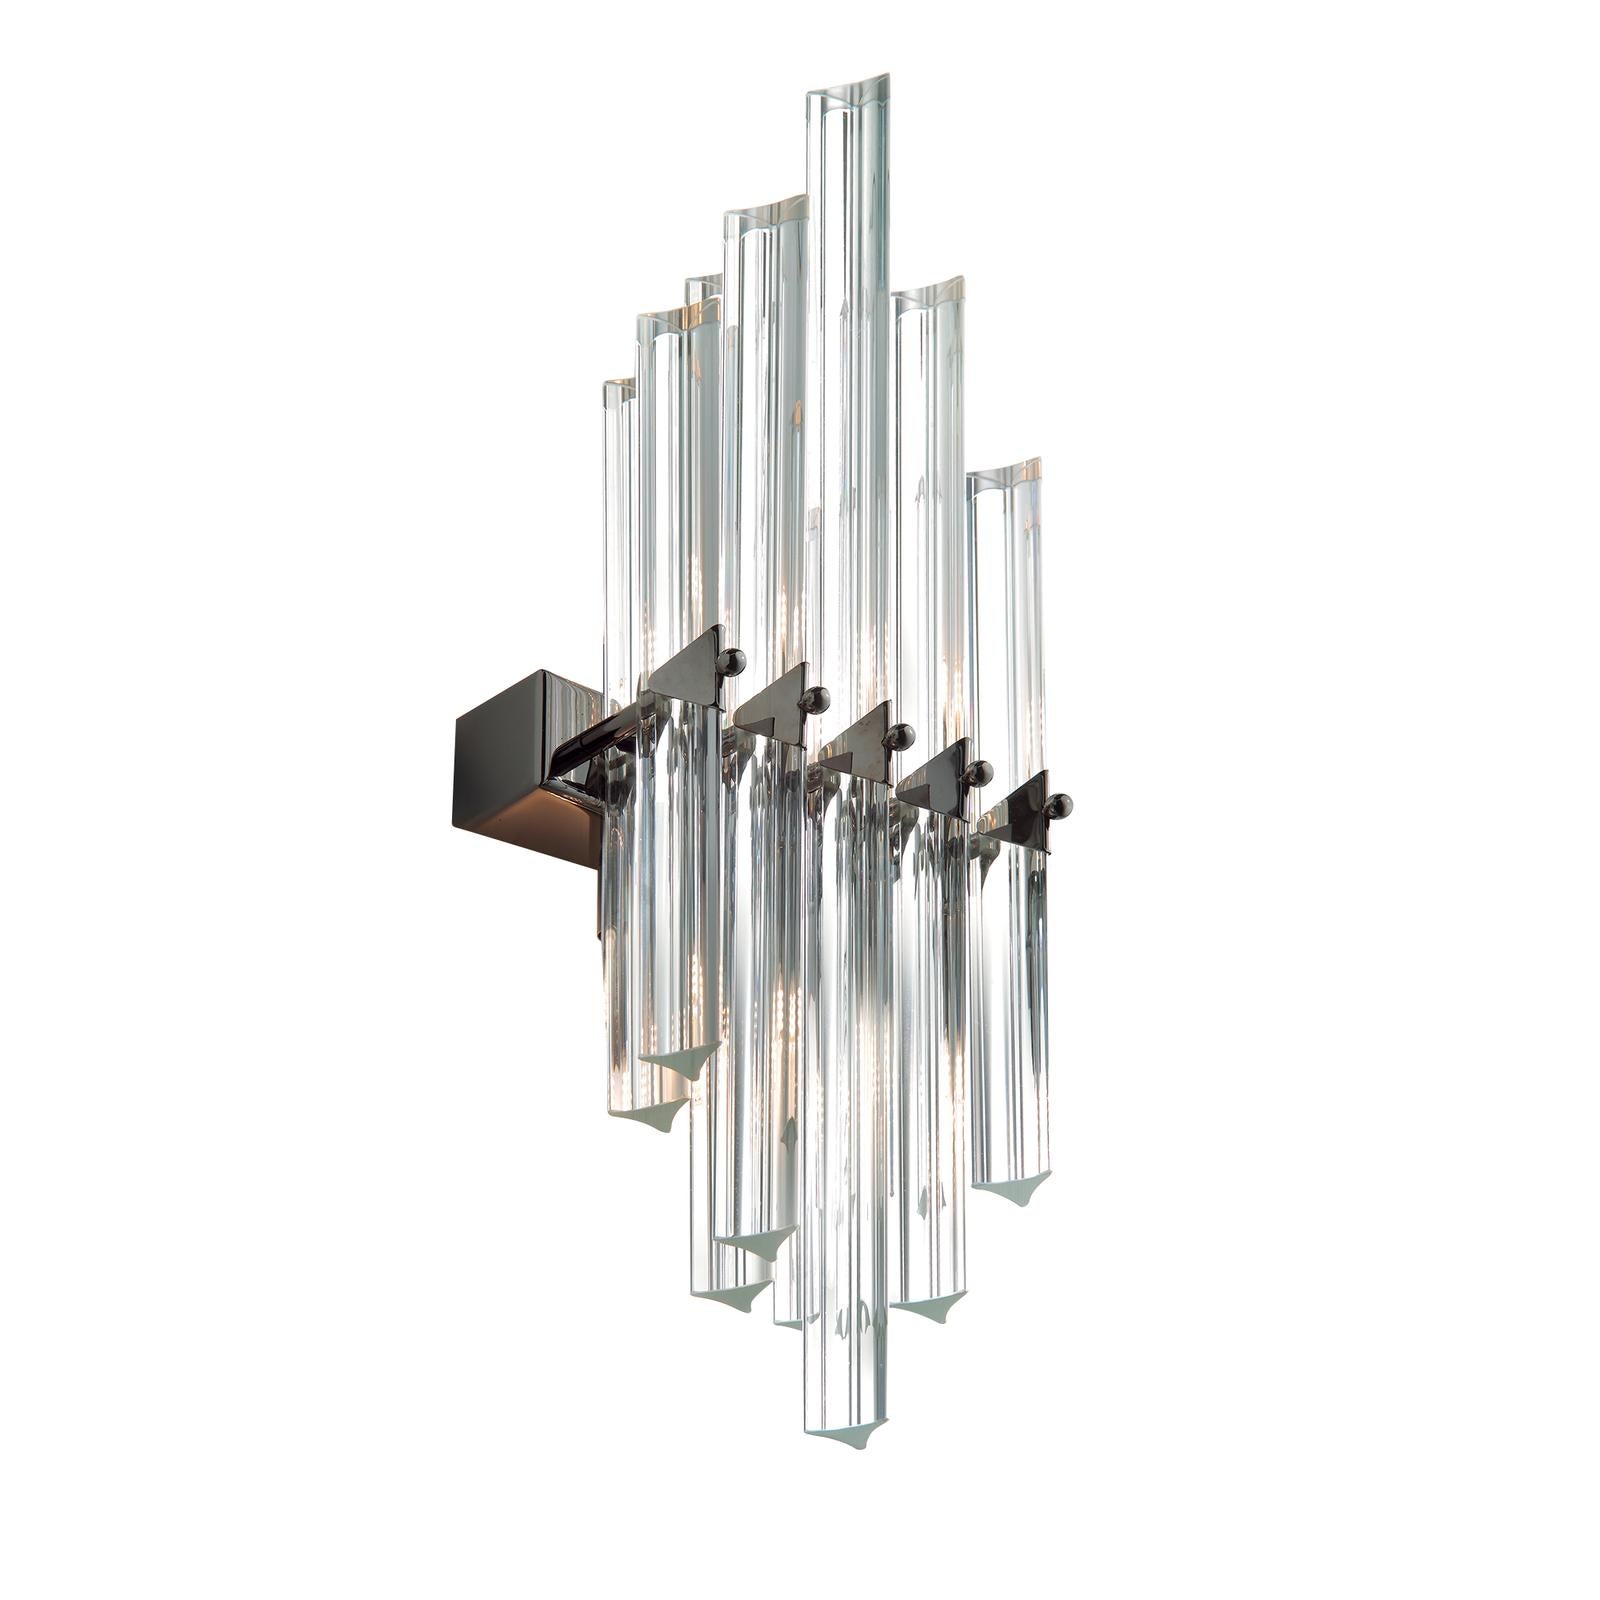 Part of the Pianoforte Collection inspired by the shape of piano keys, this wall lamp is a stunning piece of functional decor that will enliven a modern interior, adding a textured decoration, while imbuing a room with the unique reflections of the